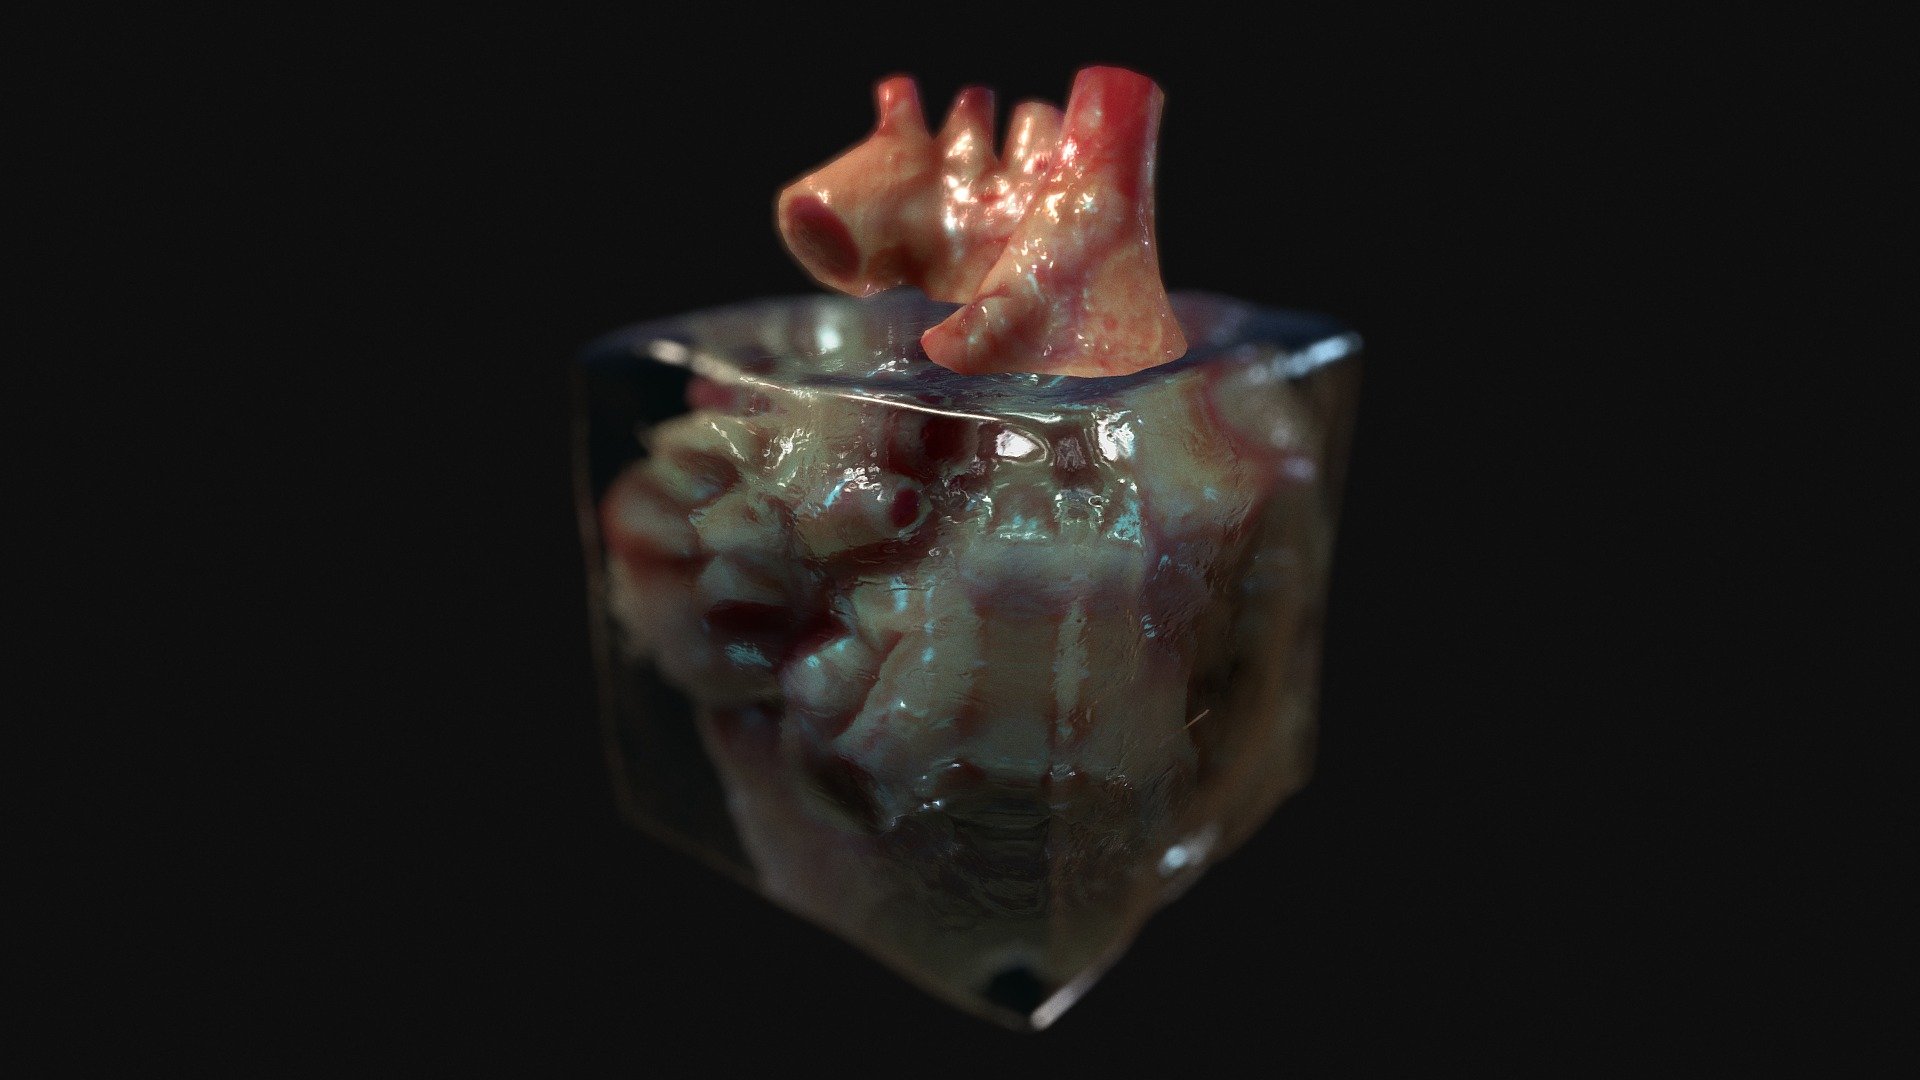 Old project updated with Sketchfab new features: subsurface scattering for the heart and refraction for the ice 3d model